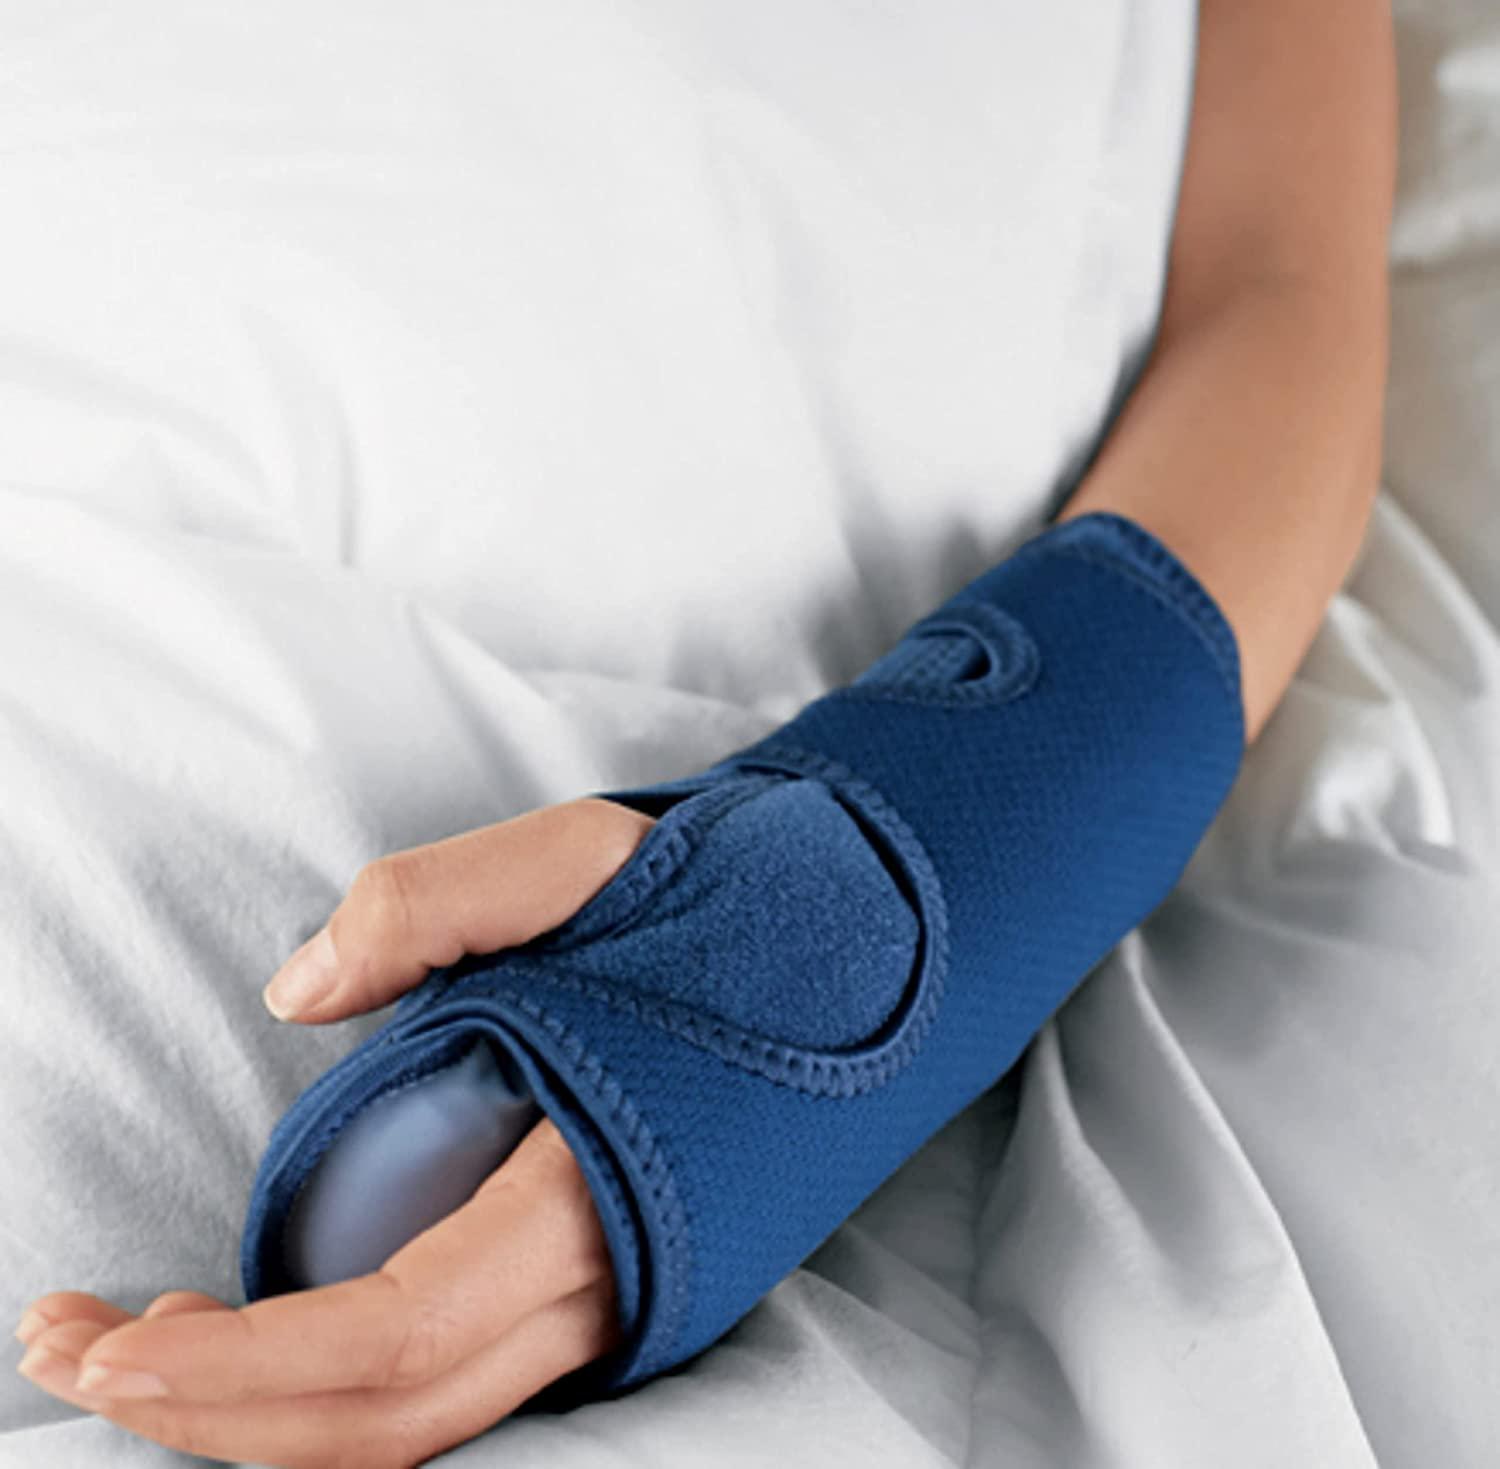 Futuro Energizing Wrist Support, Helps Relieve Symptoms of Carpal